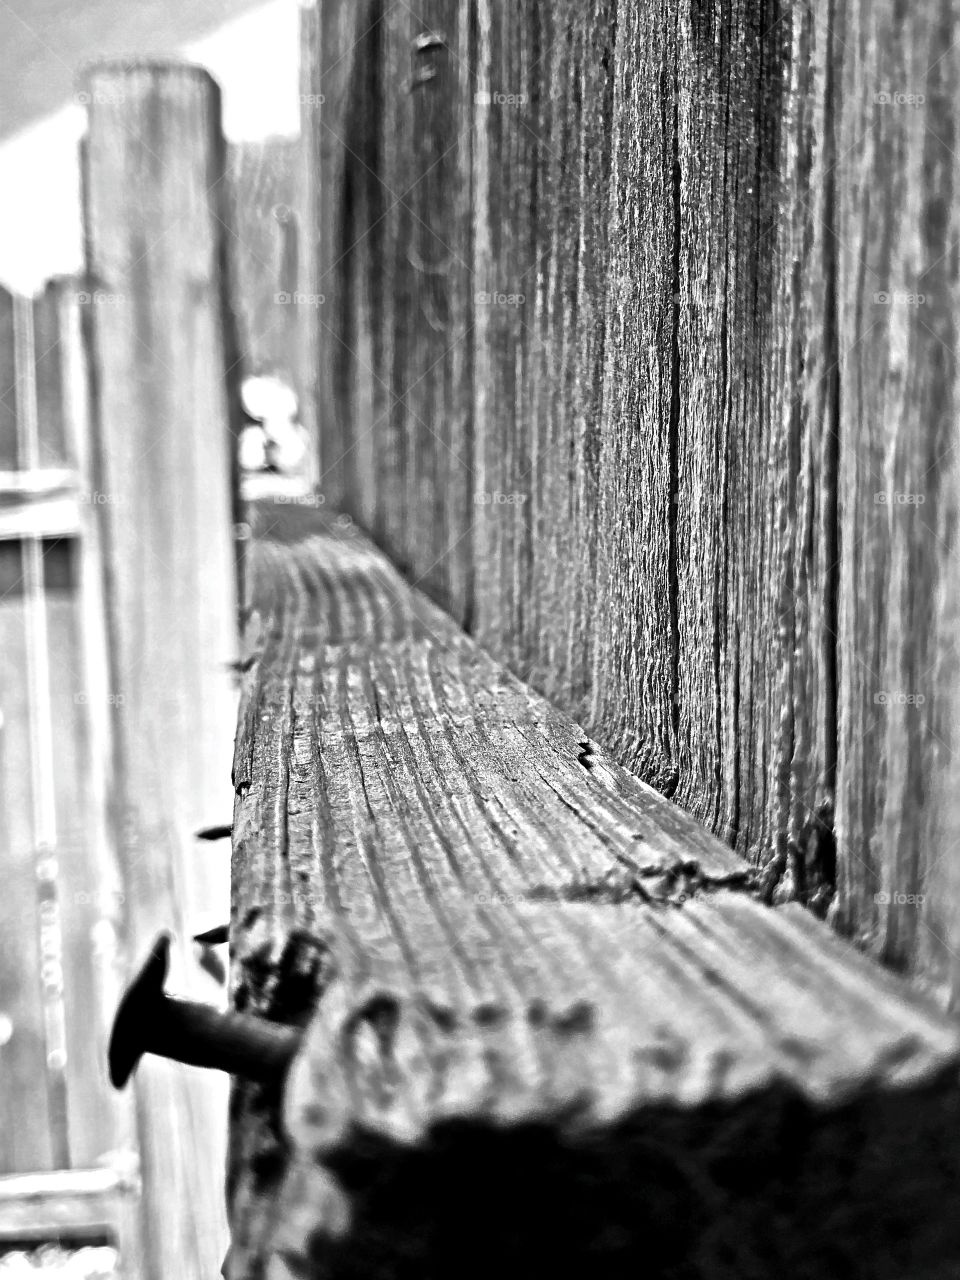 Rustic Fence 